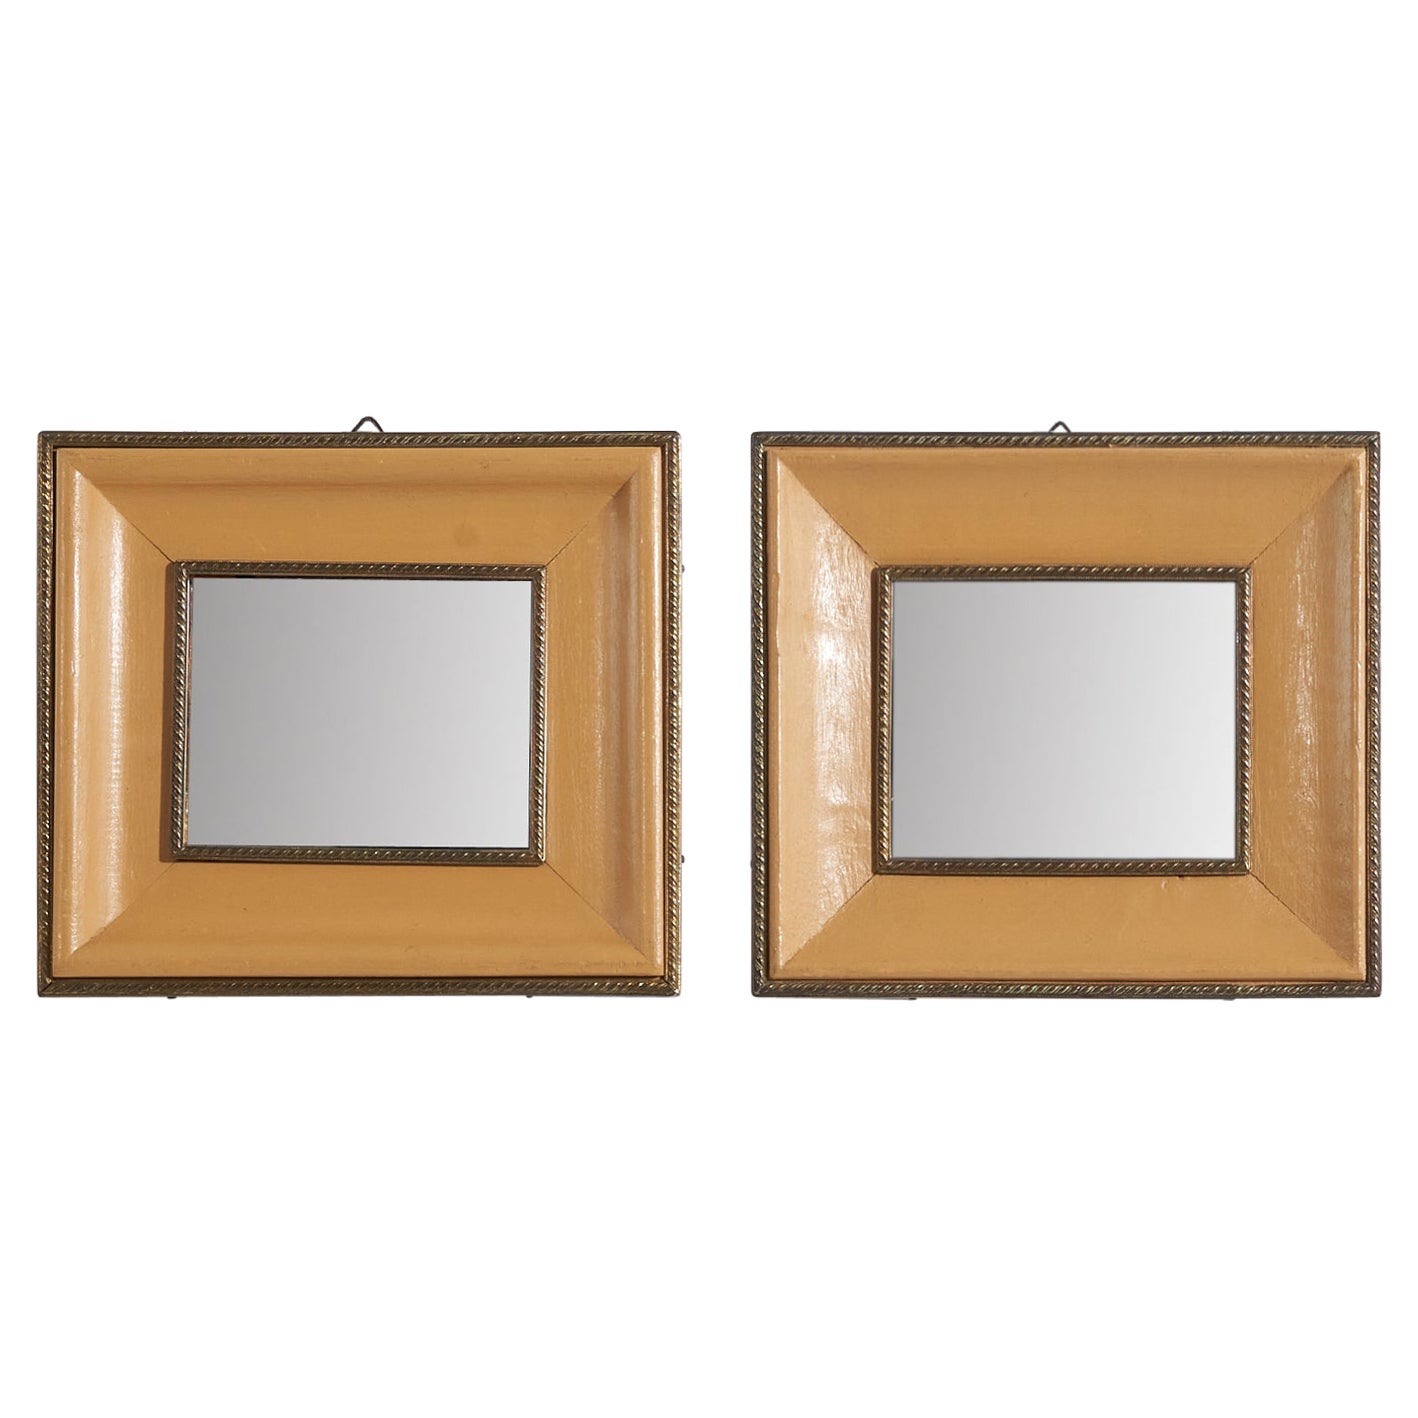 Italian Designer, Pair of Wall Mirrors, Leather, Brass, Mirror, Italy, 1940s For Sale